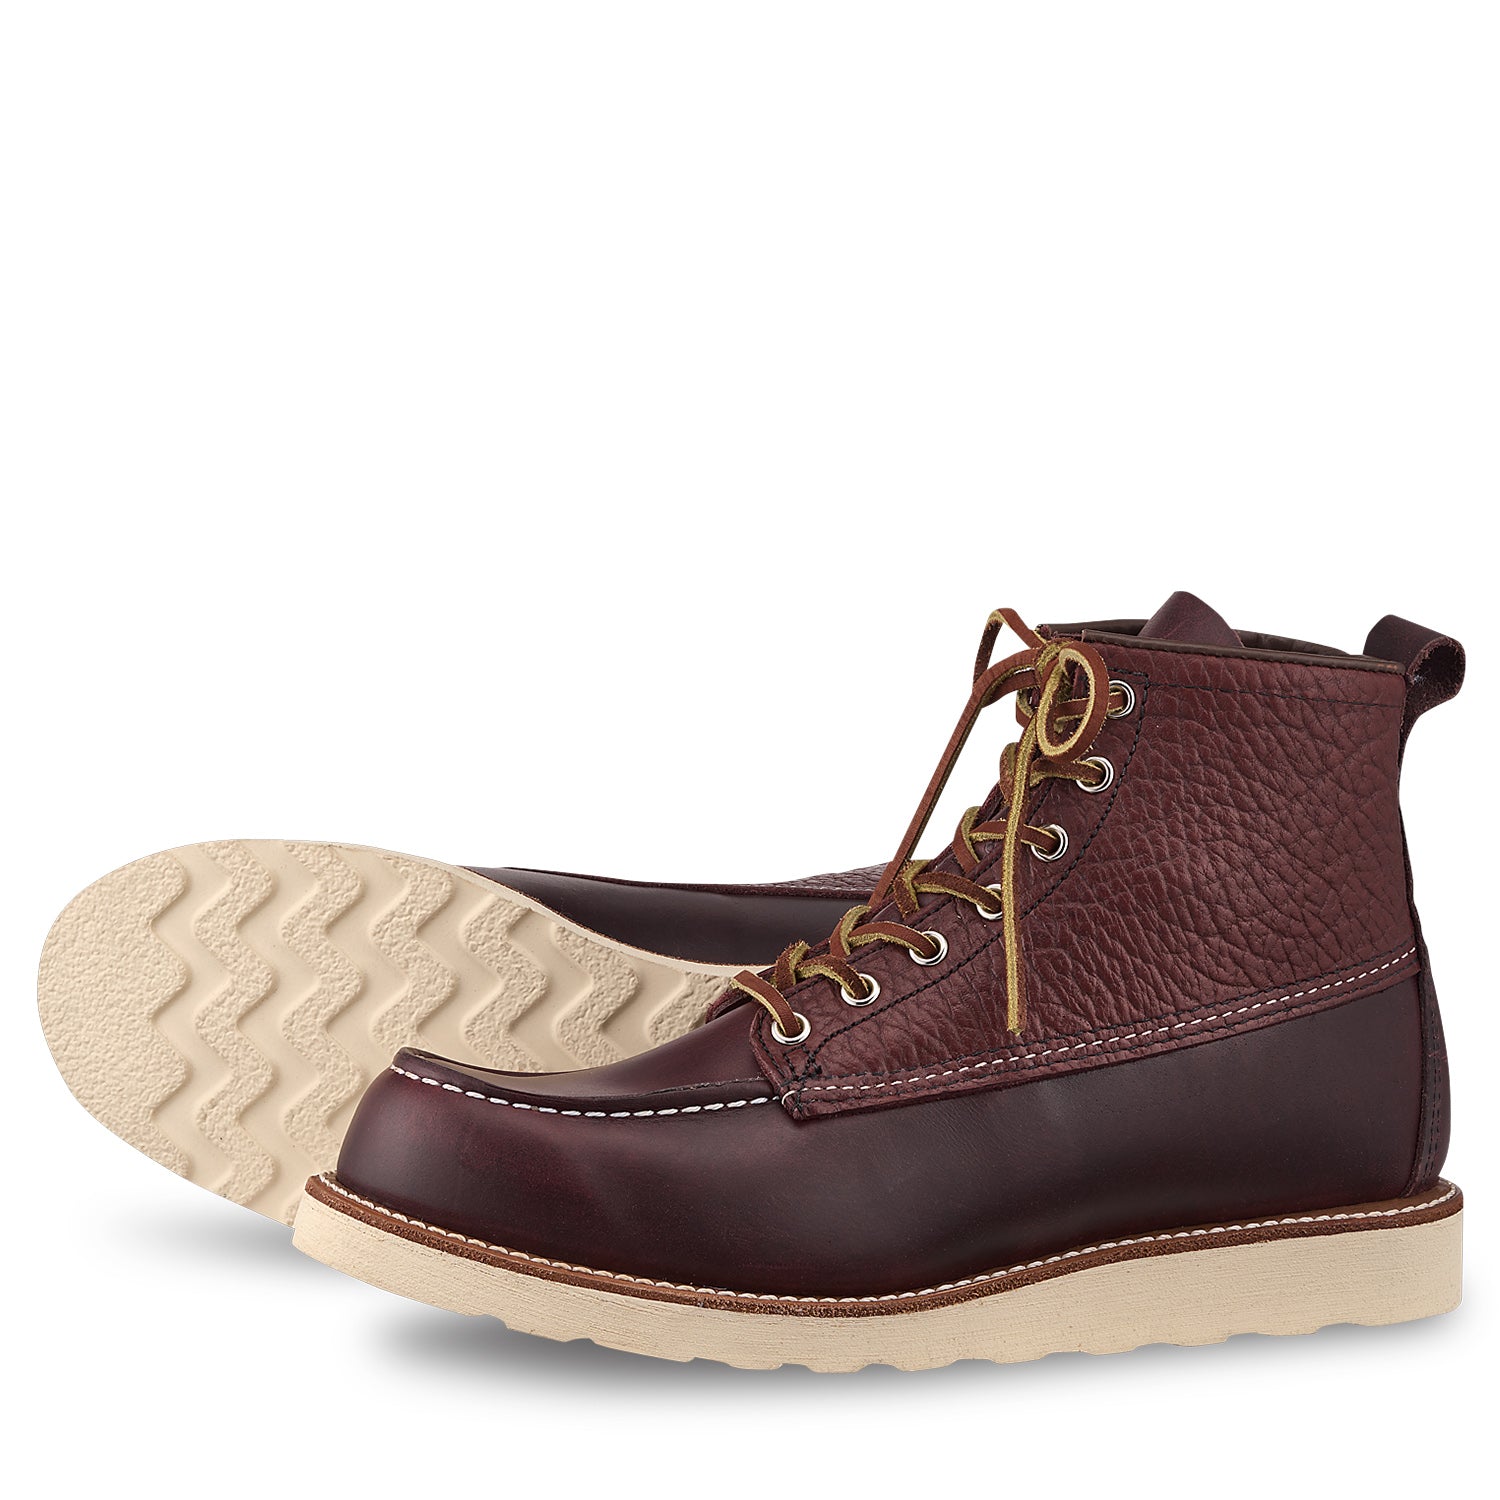 87520 Chop Moc Toe American Bison & Black Cherry Excalibur – Red Wing